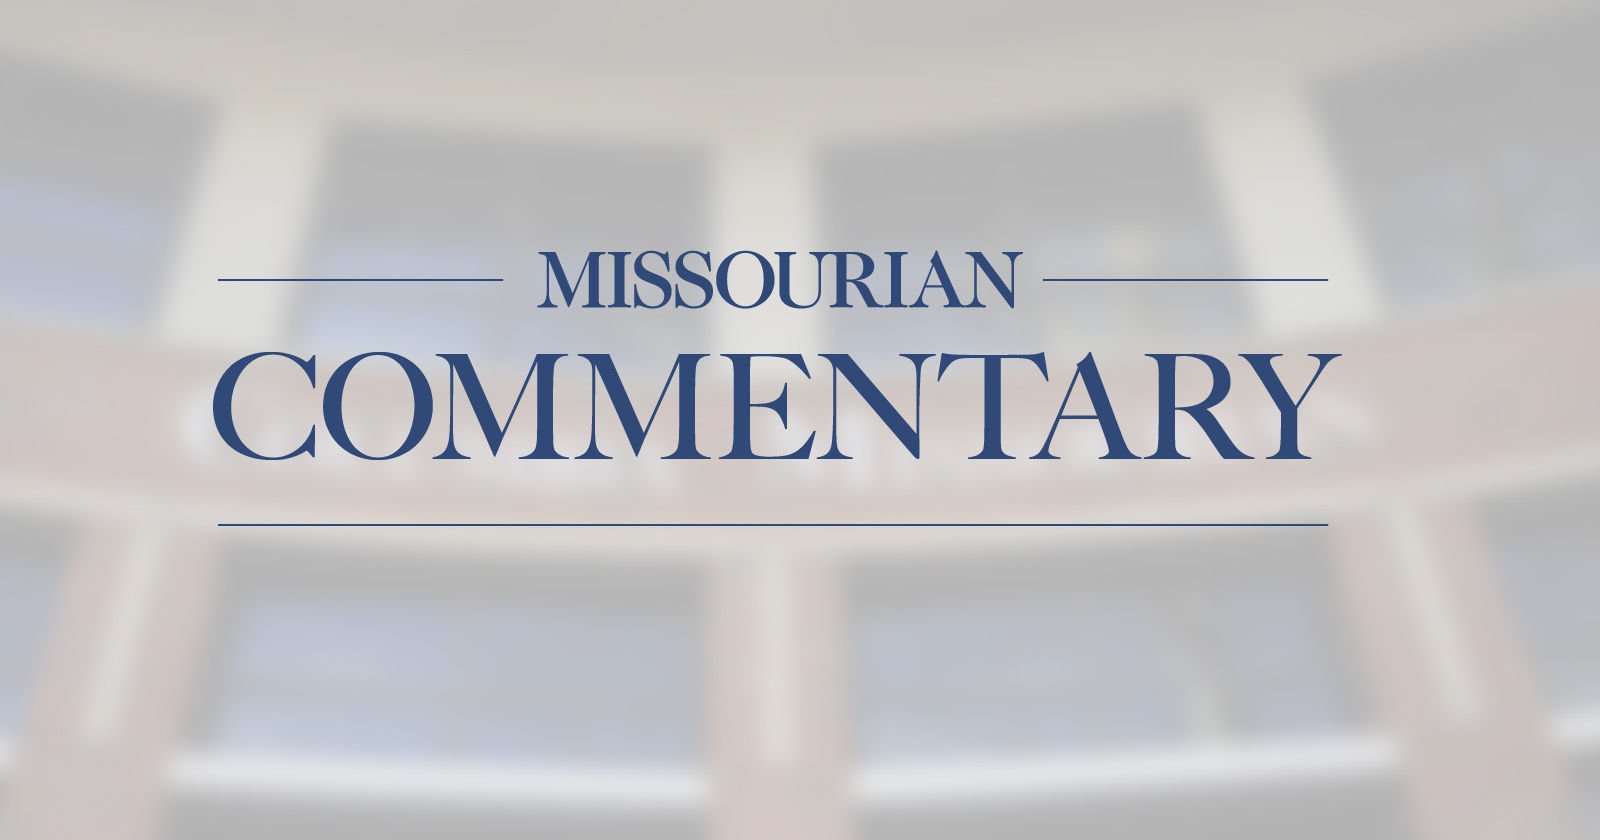 GUEST COMMENTARY: Recent efforts to address teacher shortage miss the real problems